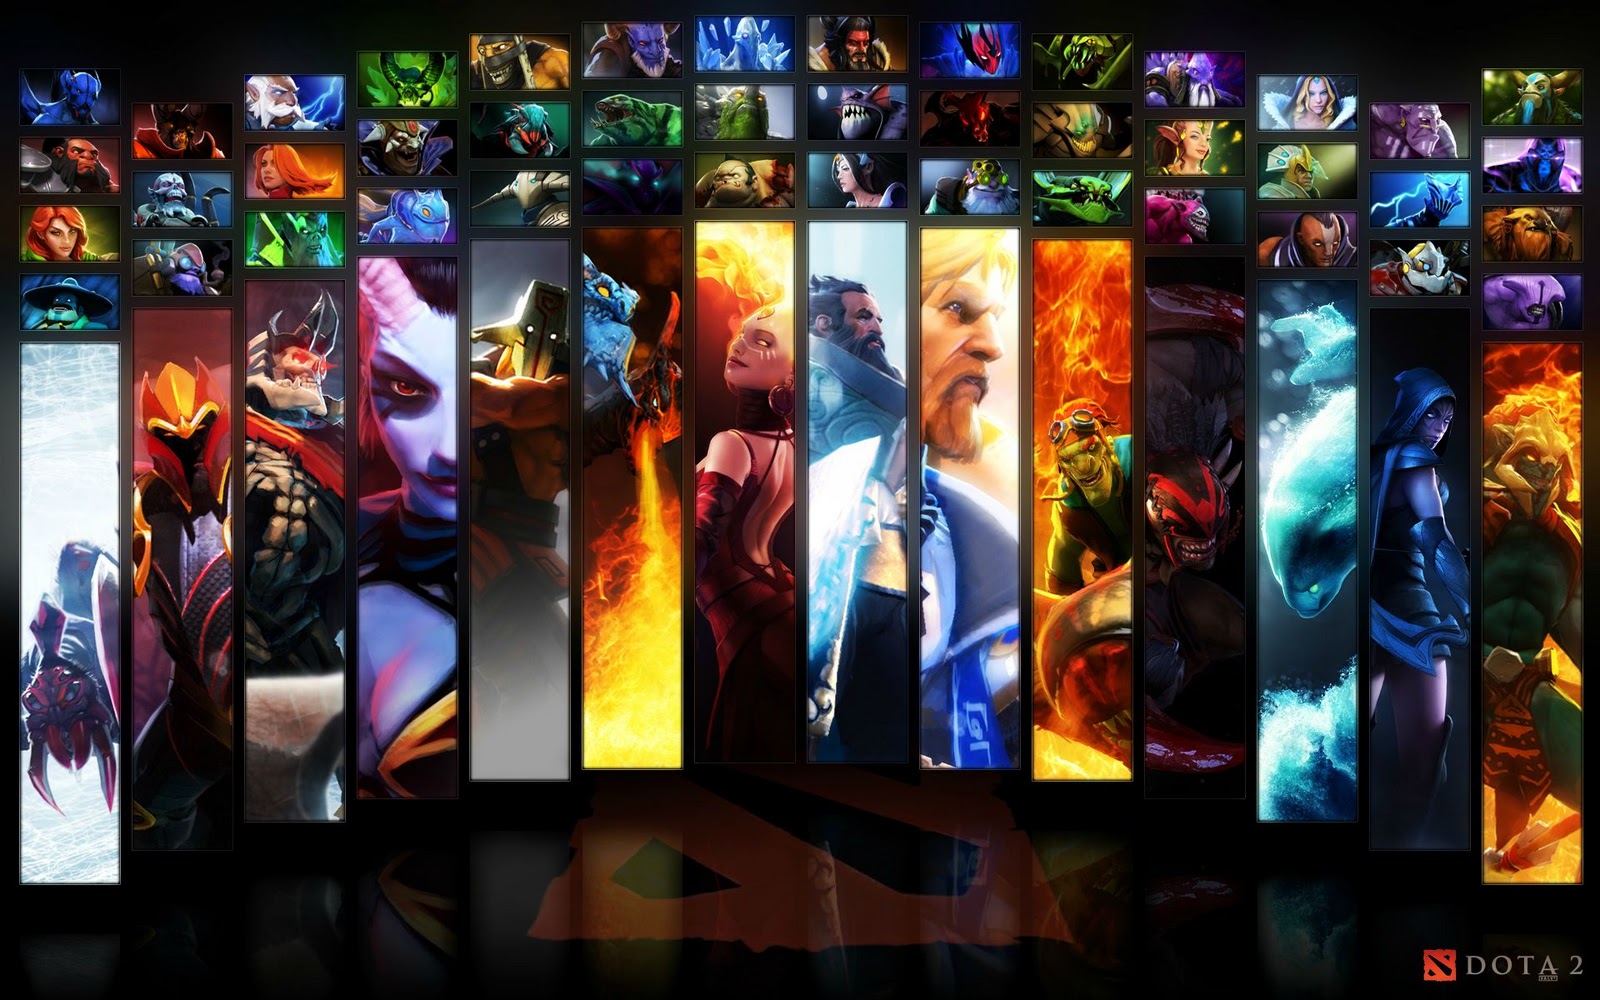  Dota 2 HD Android Wallpapers